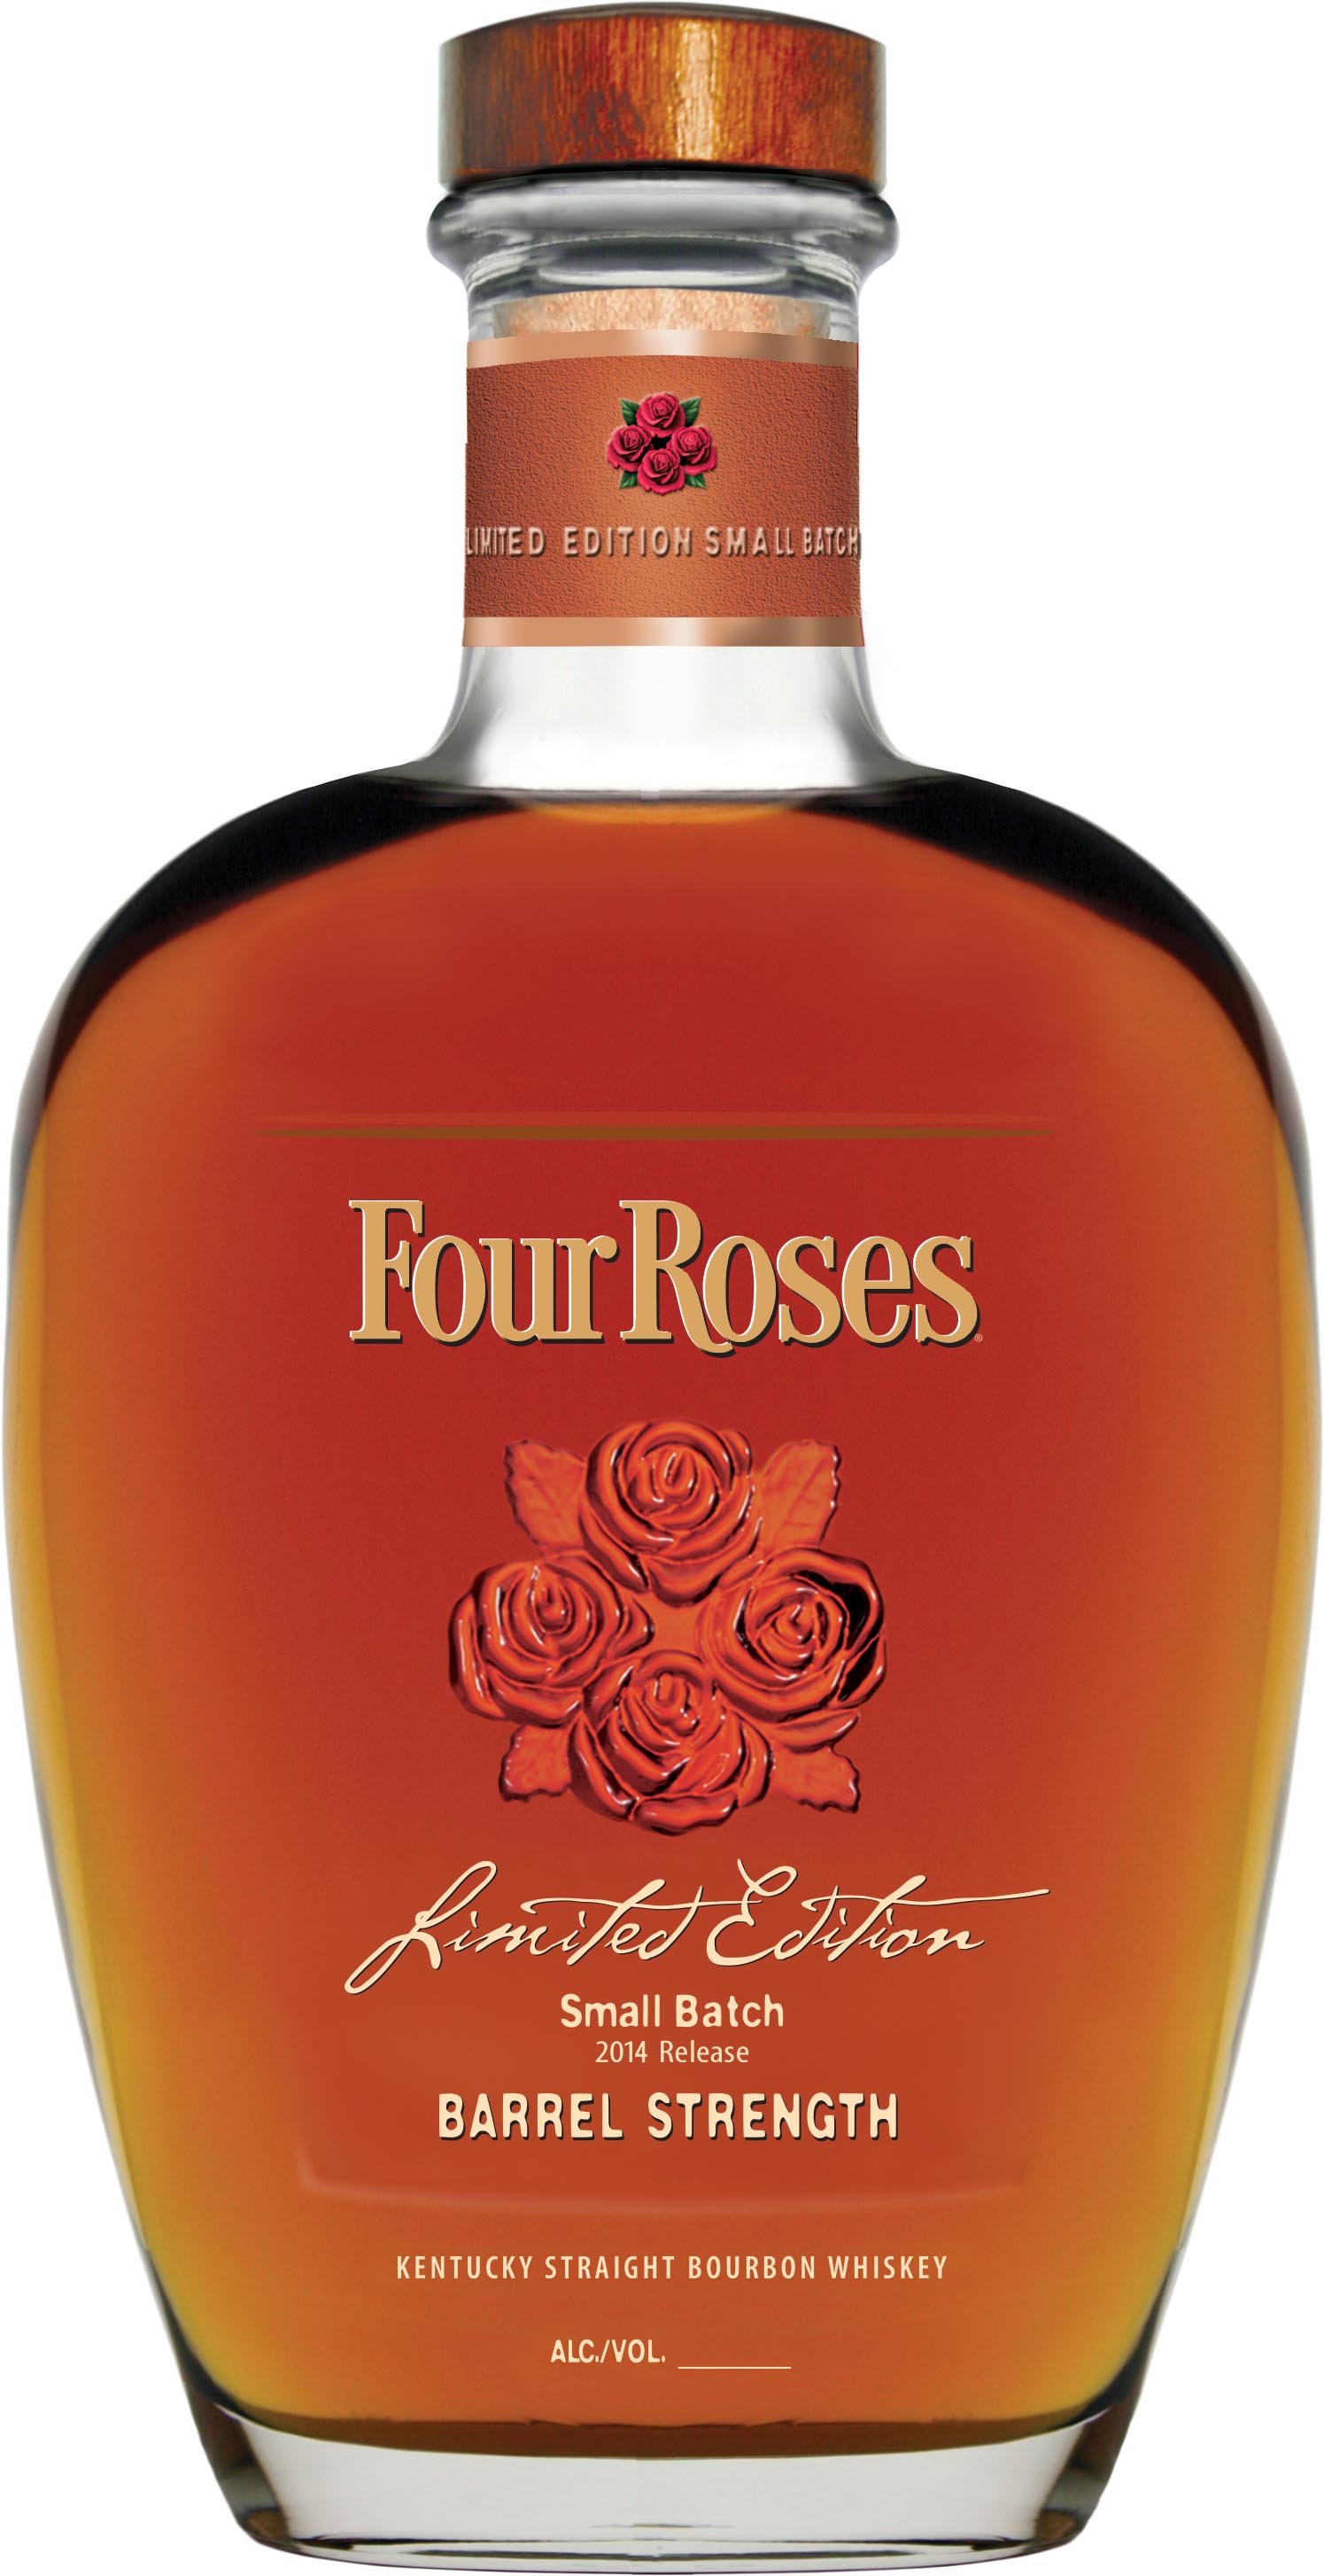 Four Roses Limited Edition Small Batch Bourbon 2014 Edition